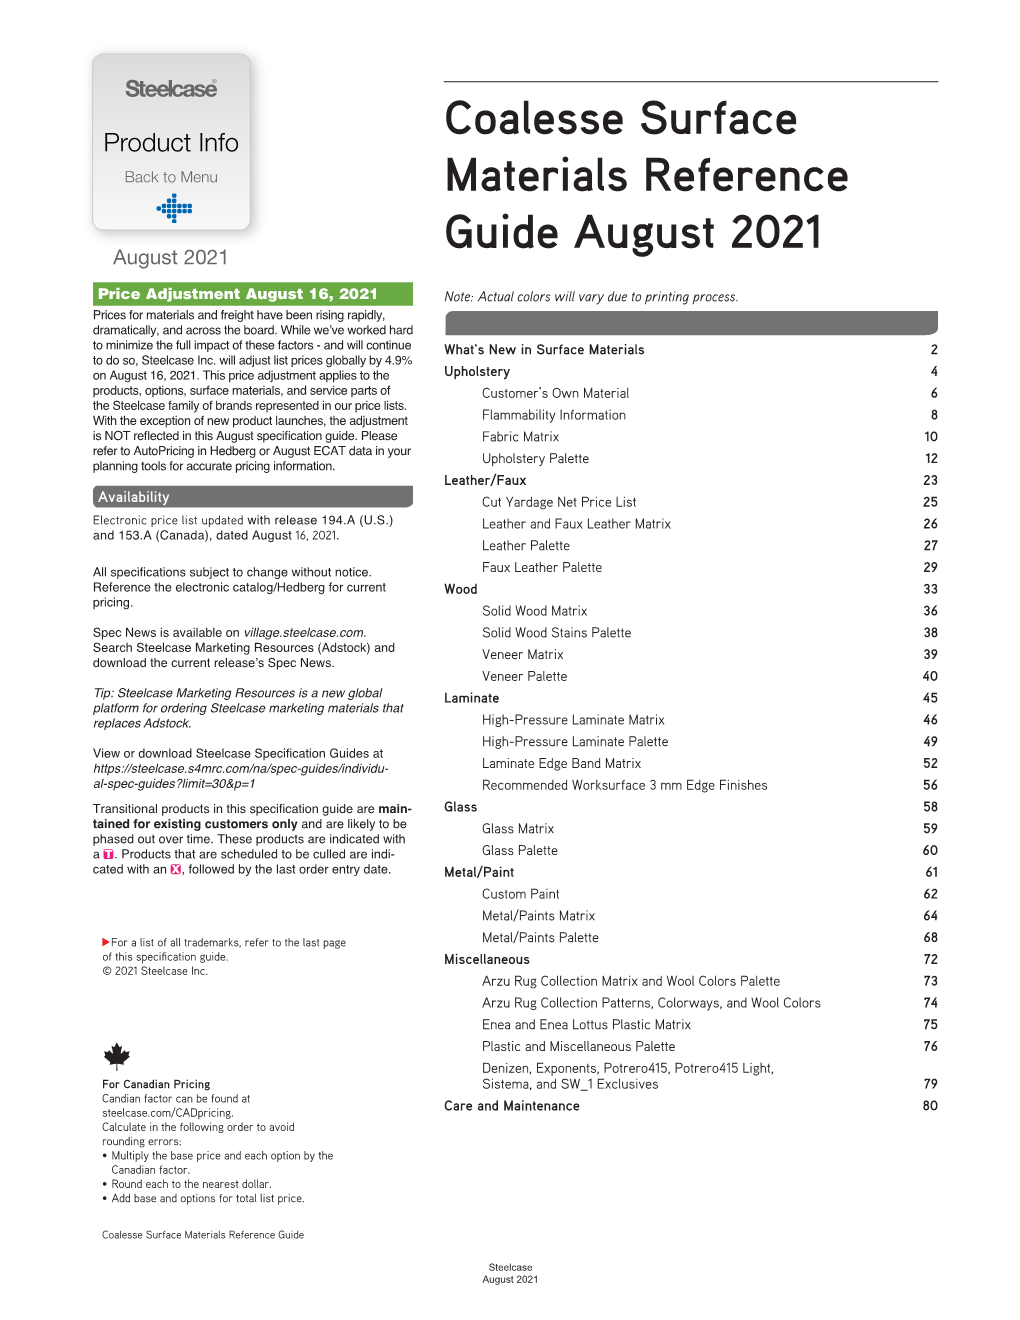 Coalesse Surface Materials Reference Guide August 2021